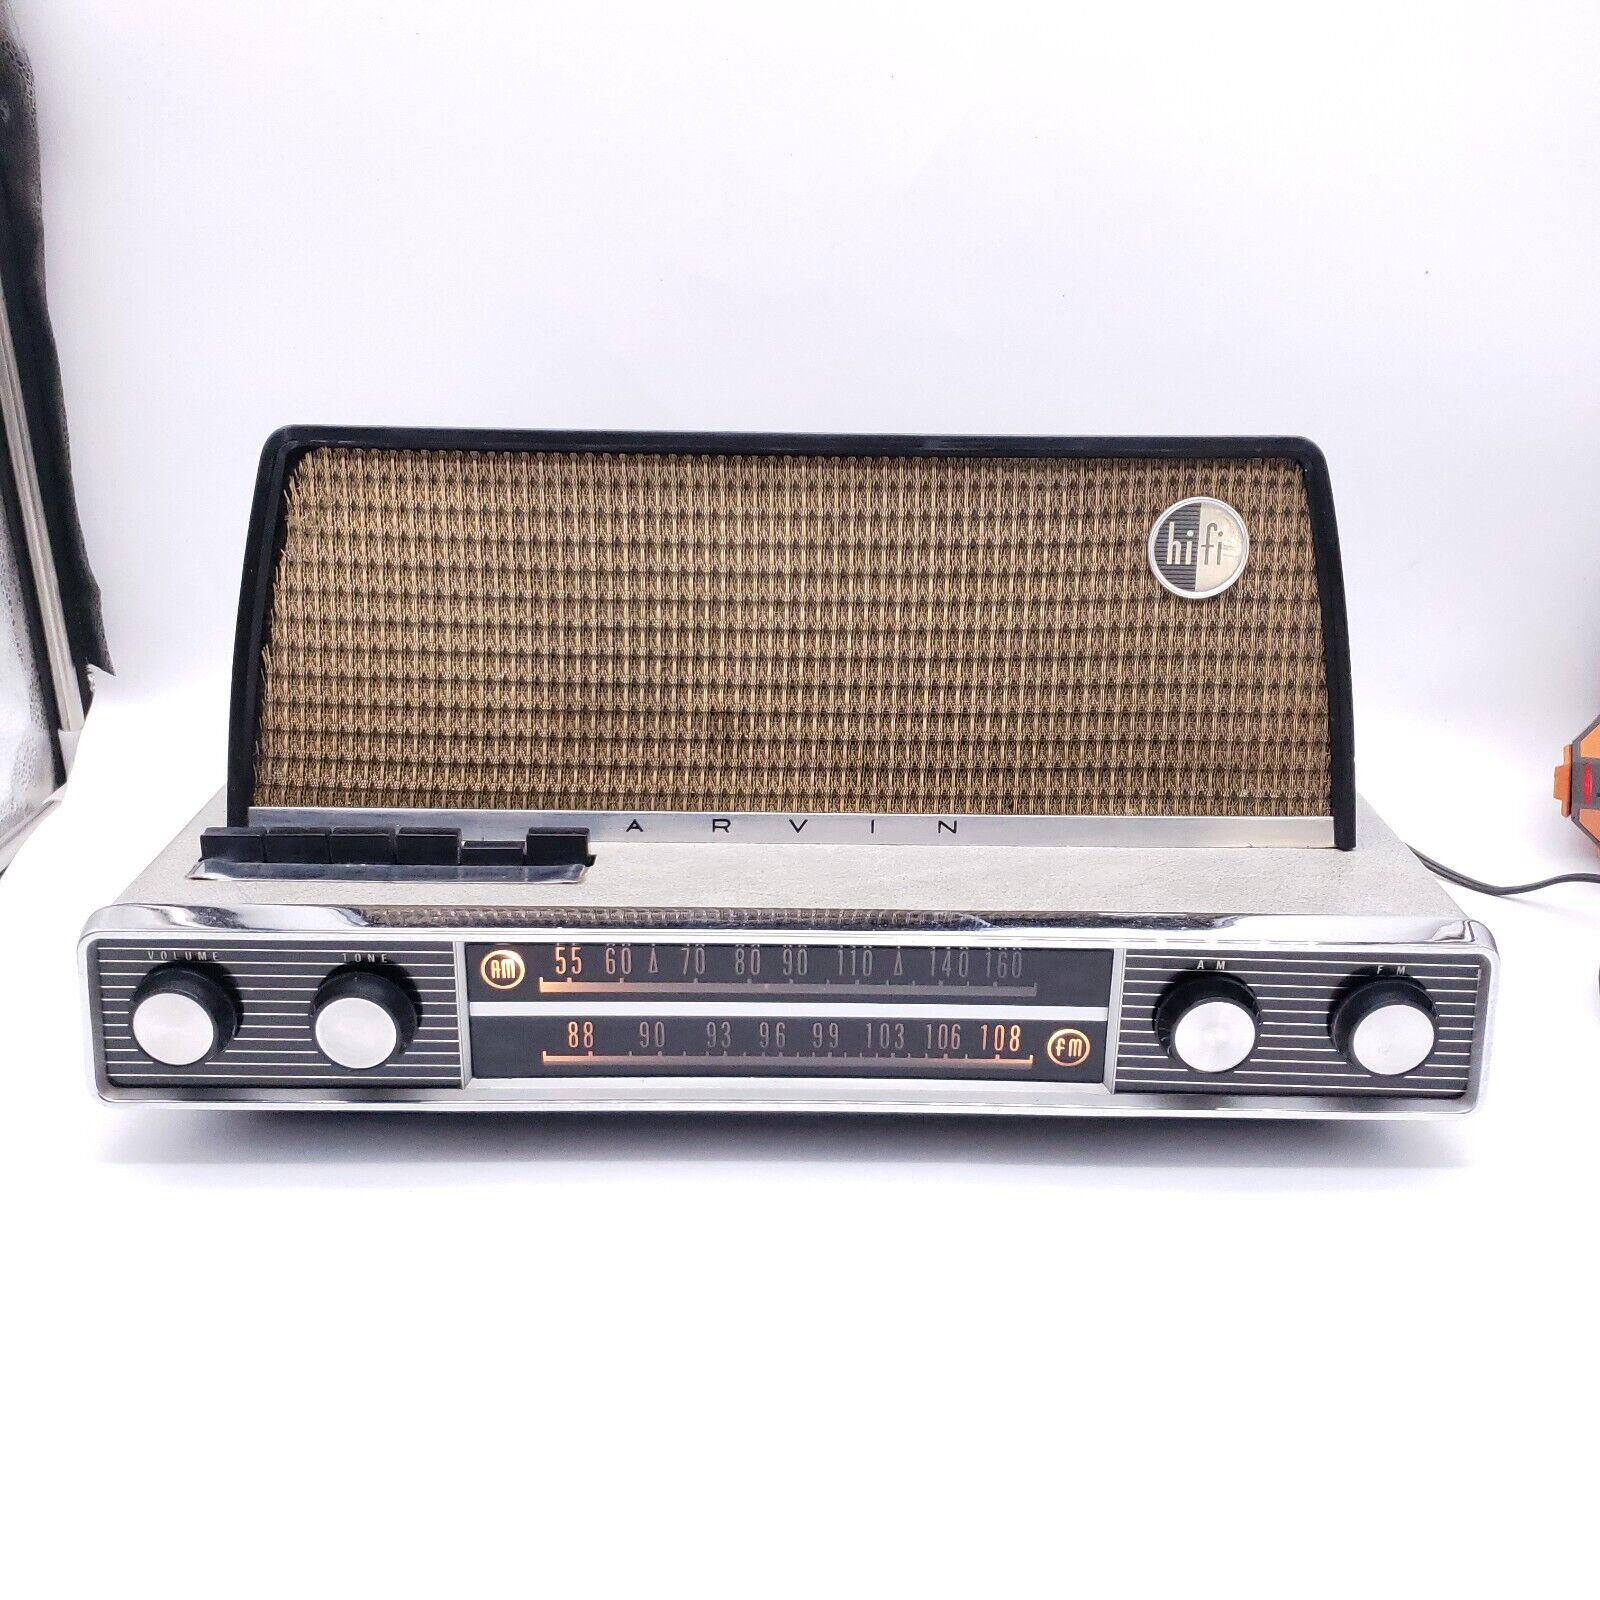 Vintage Am/fm Arvin Model 3586 Tube Radio Mcm Atomic Plays Great Looks Awesome!